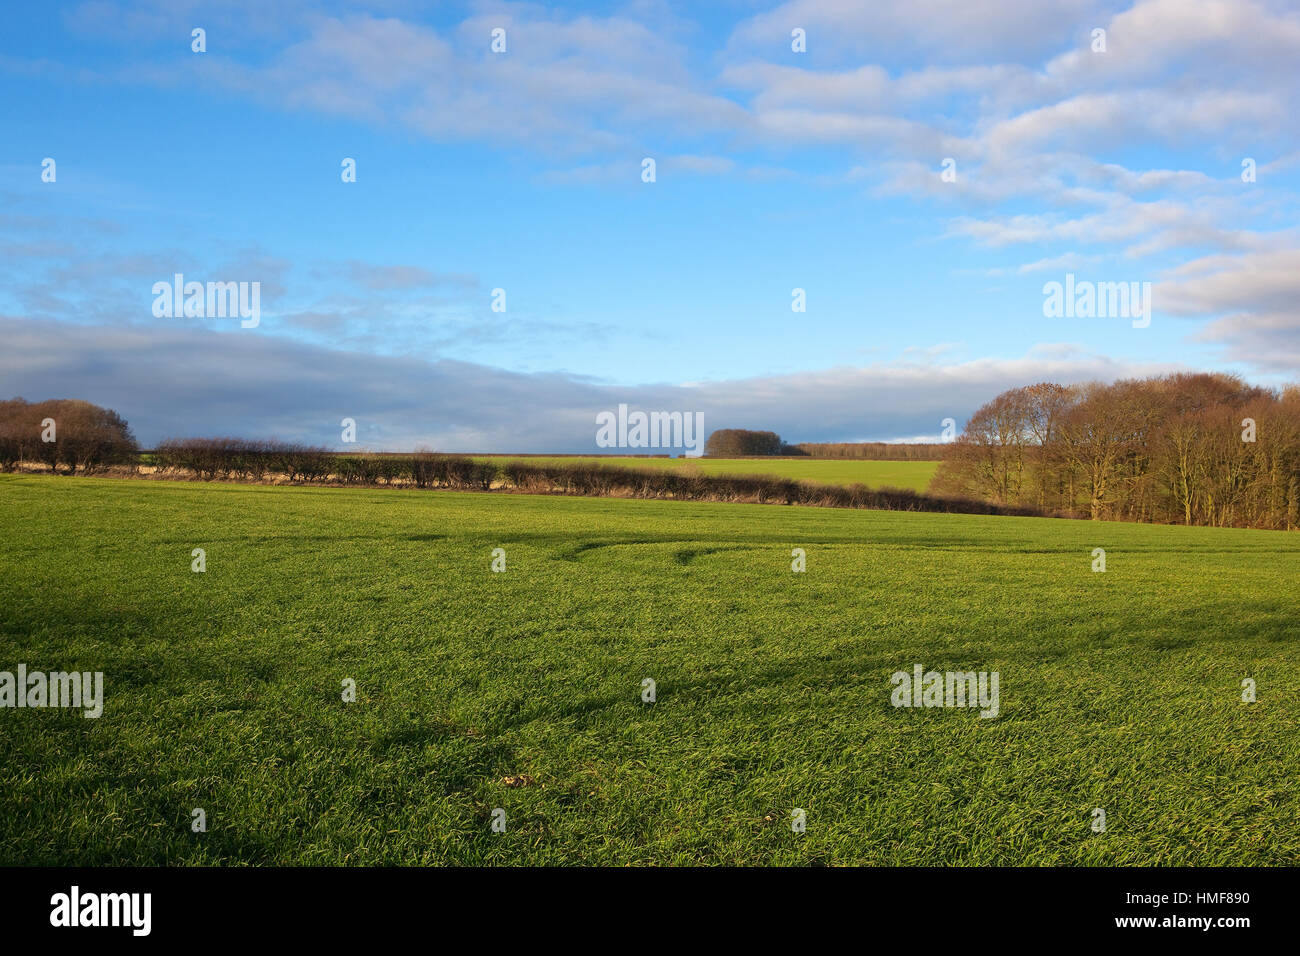 A green wheat field with hedgerows and a woodland copse in a scenic Yorkshire wolds landscape under a blue cloudy sky in winter. Stock Photo